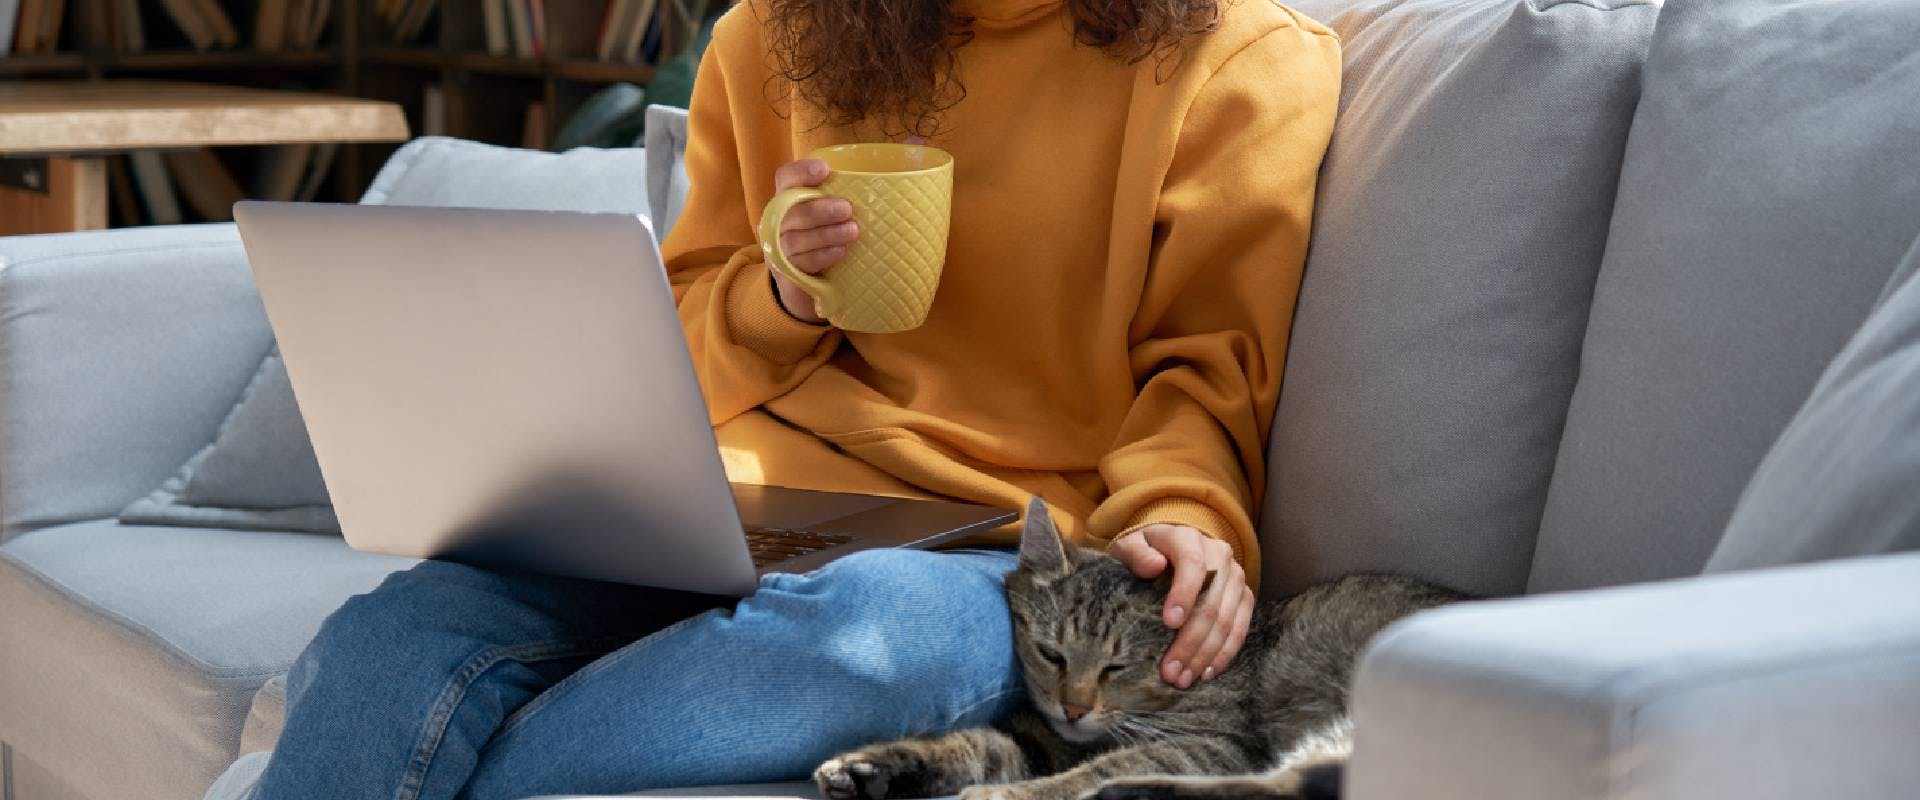 Person sat on a sofa with a laptop, petting a cat